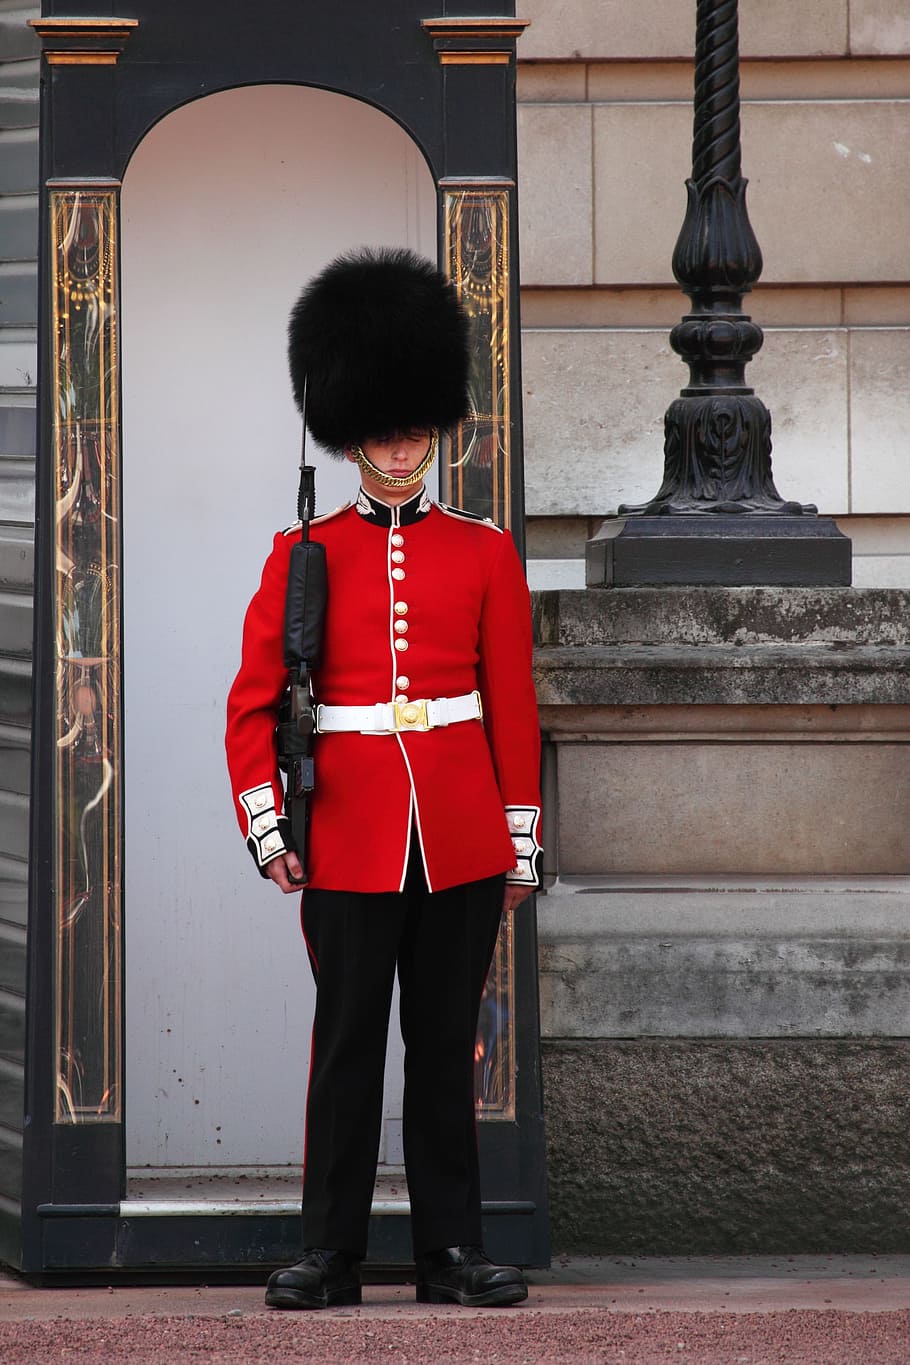 man standing in front of building, Buckingham, Palace, Duty, England